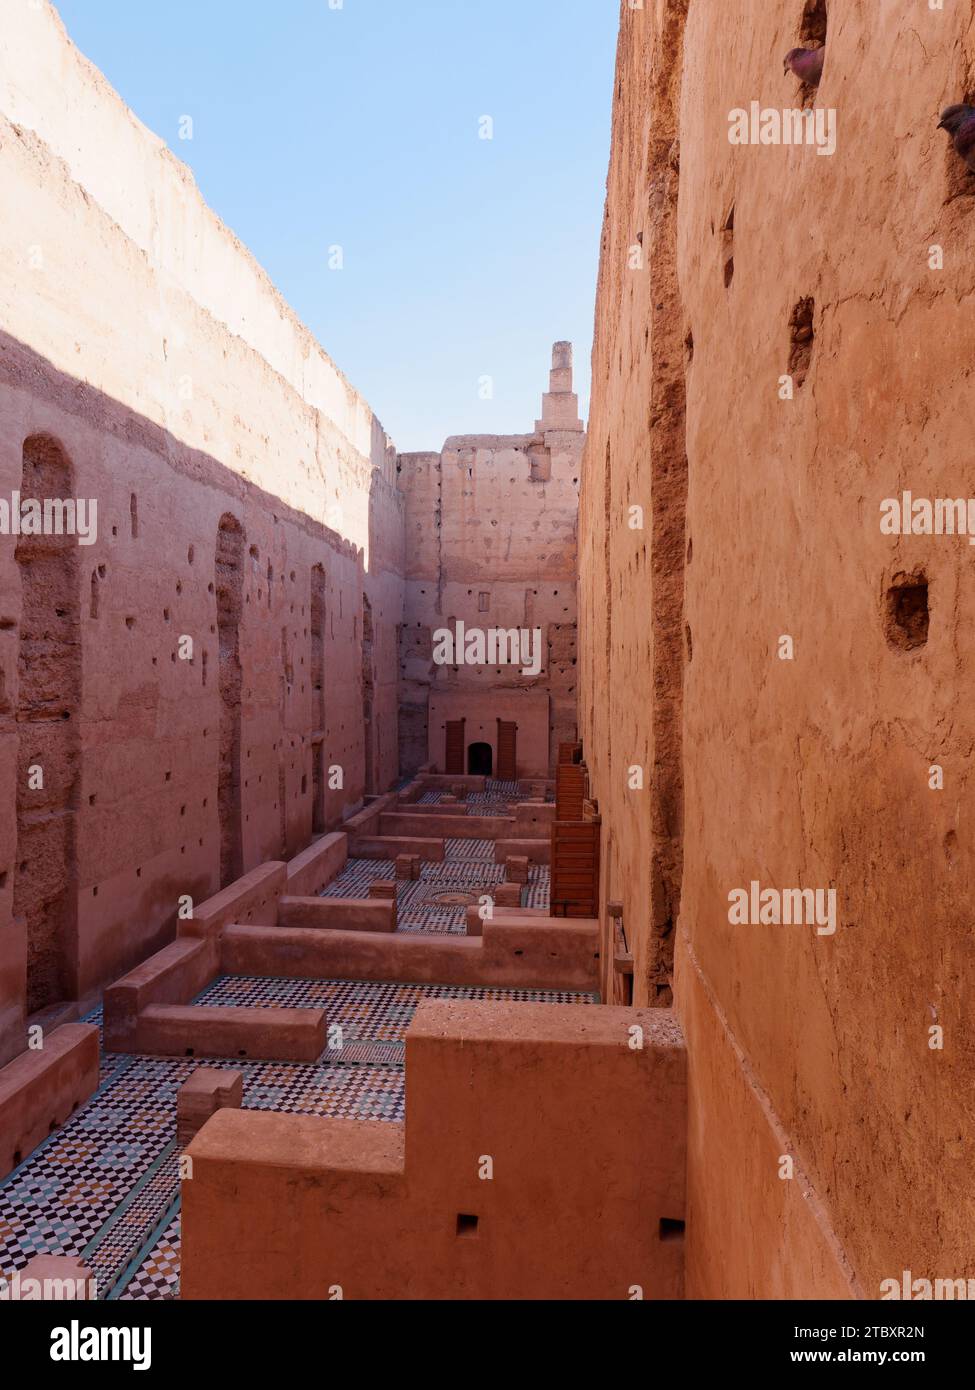 Courtyard with high earthen walls with tiled floors in Badi Palace as birds stick heads out. Marrakesh aka Marrakech, Morocco, December 09, 2023 Stock Photo